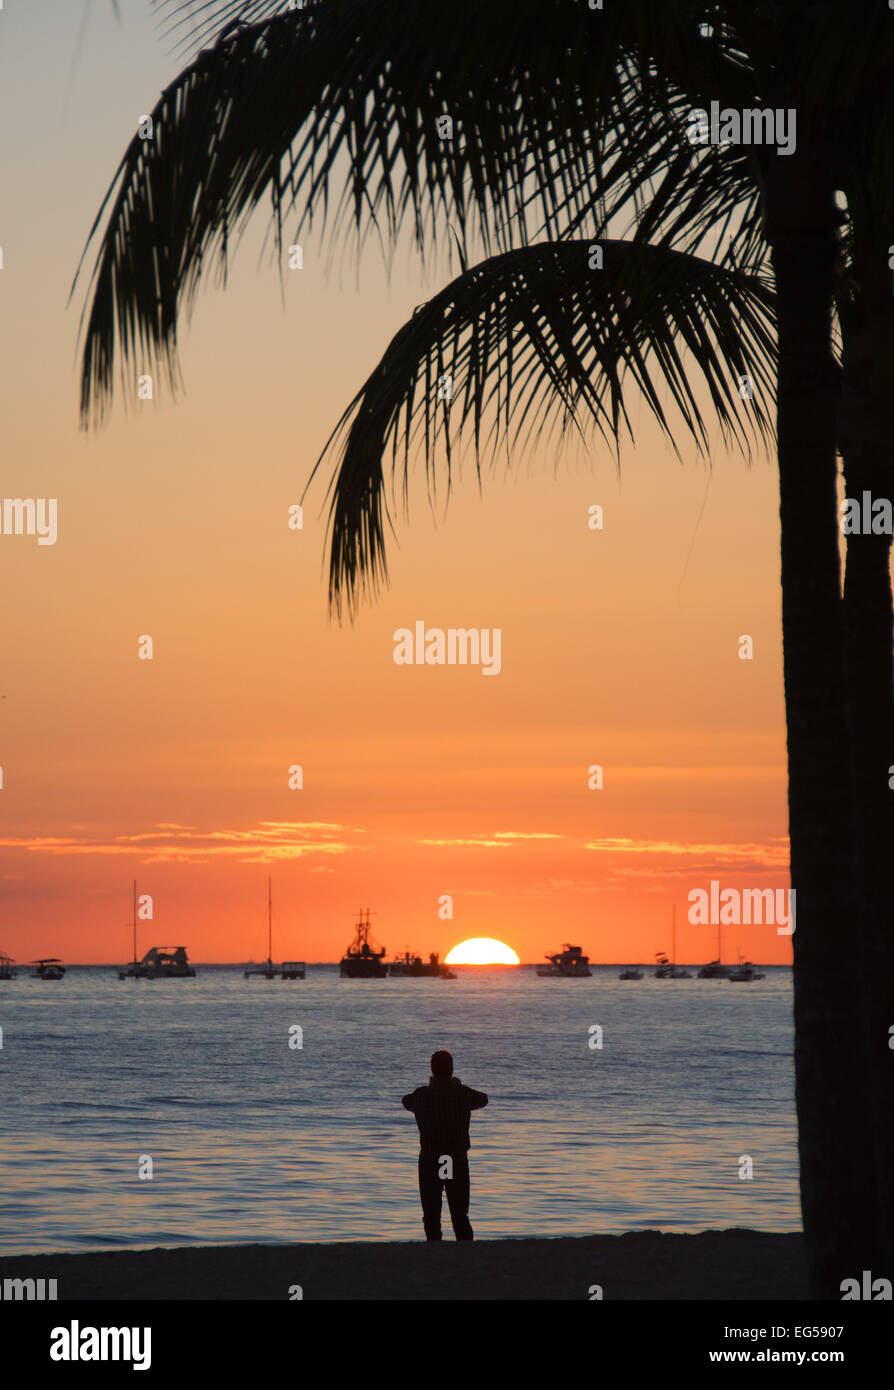 DOMINICAN REPUBLIC. A holidaymaker photographing the sunrise at Punta Cana beach on the Atlantic coast. 2015. Stock Photo